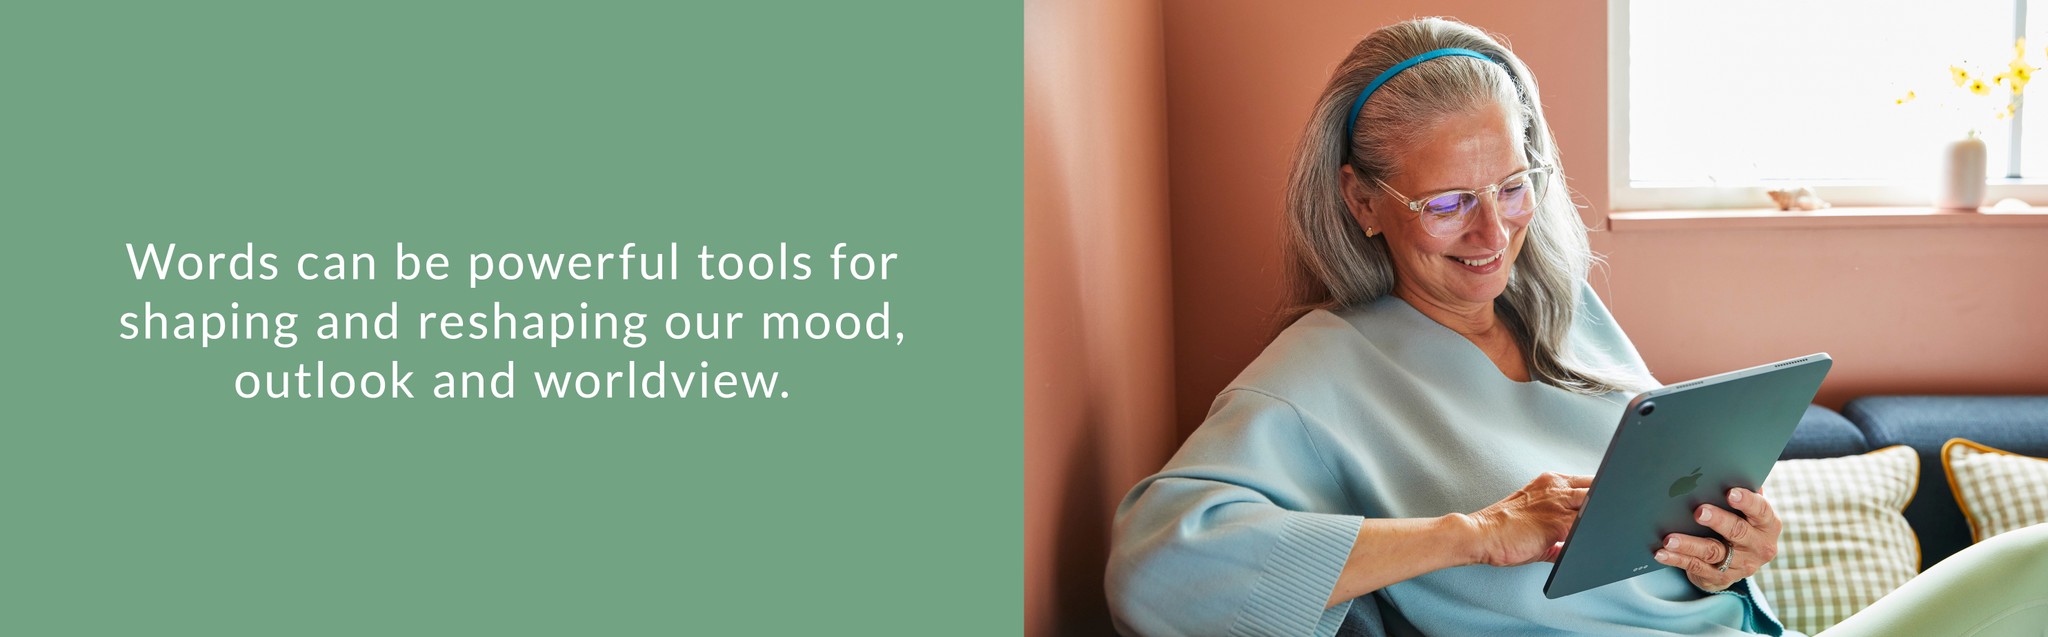 Words can be powerful tools for shaping and reshaping our mood